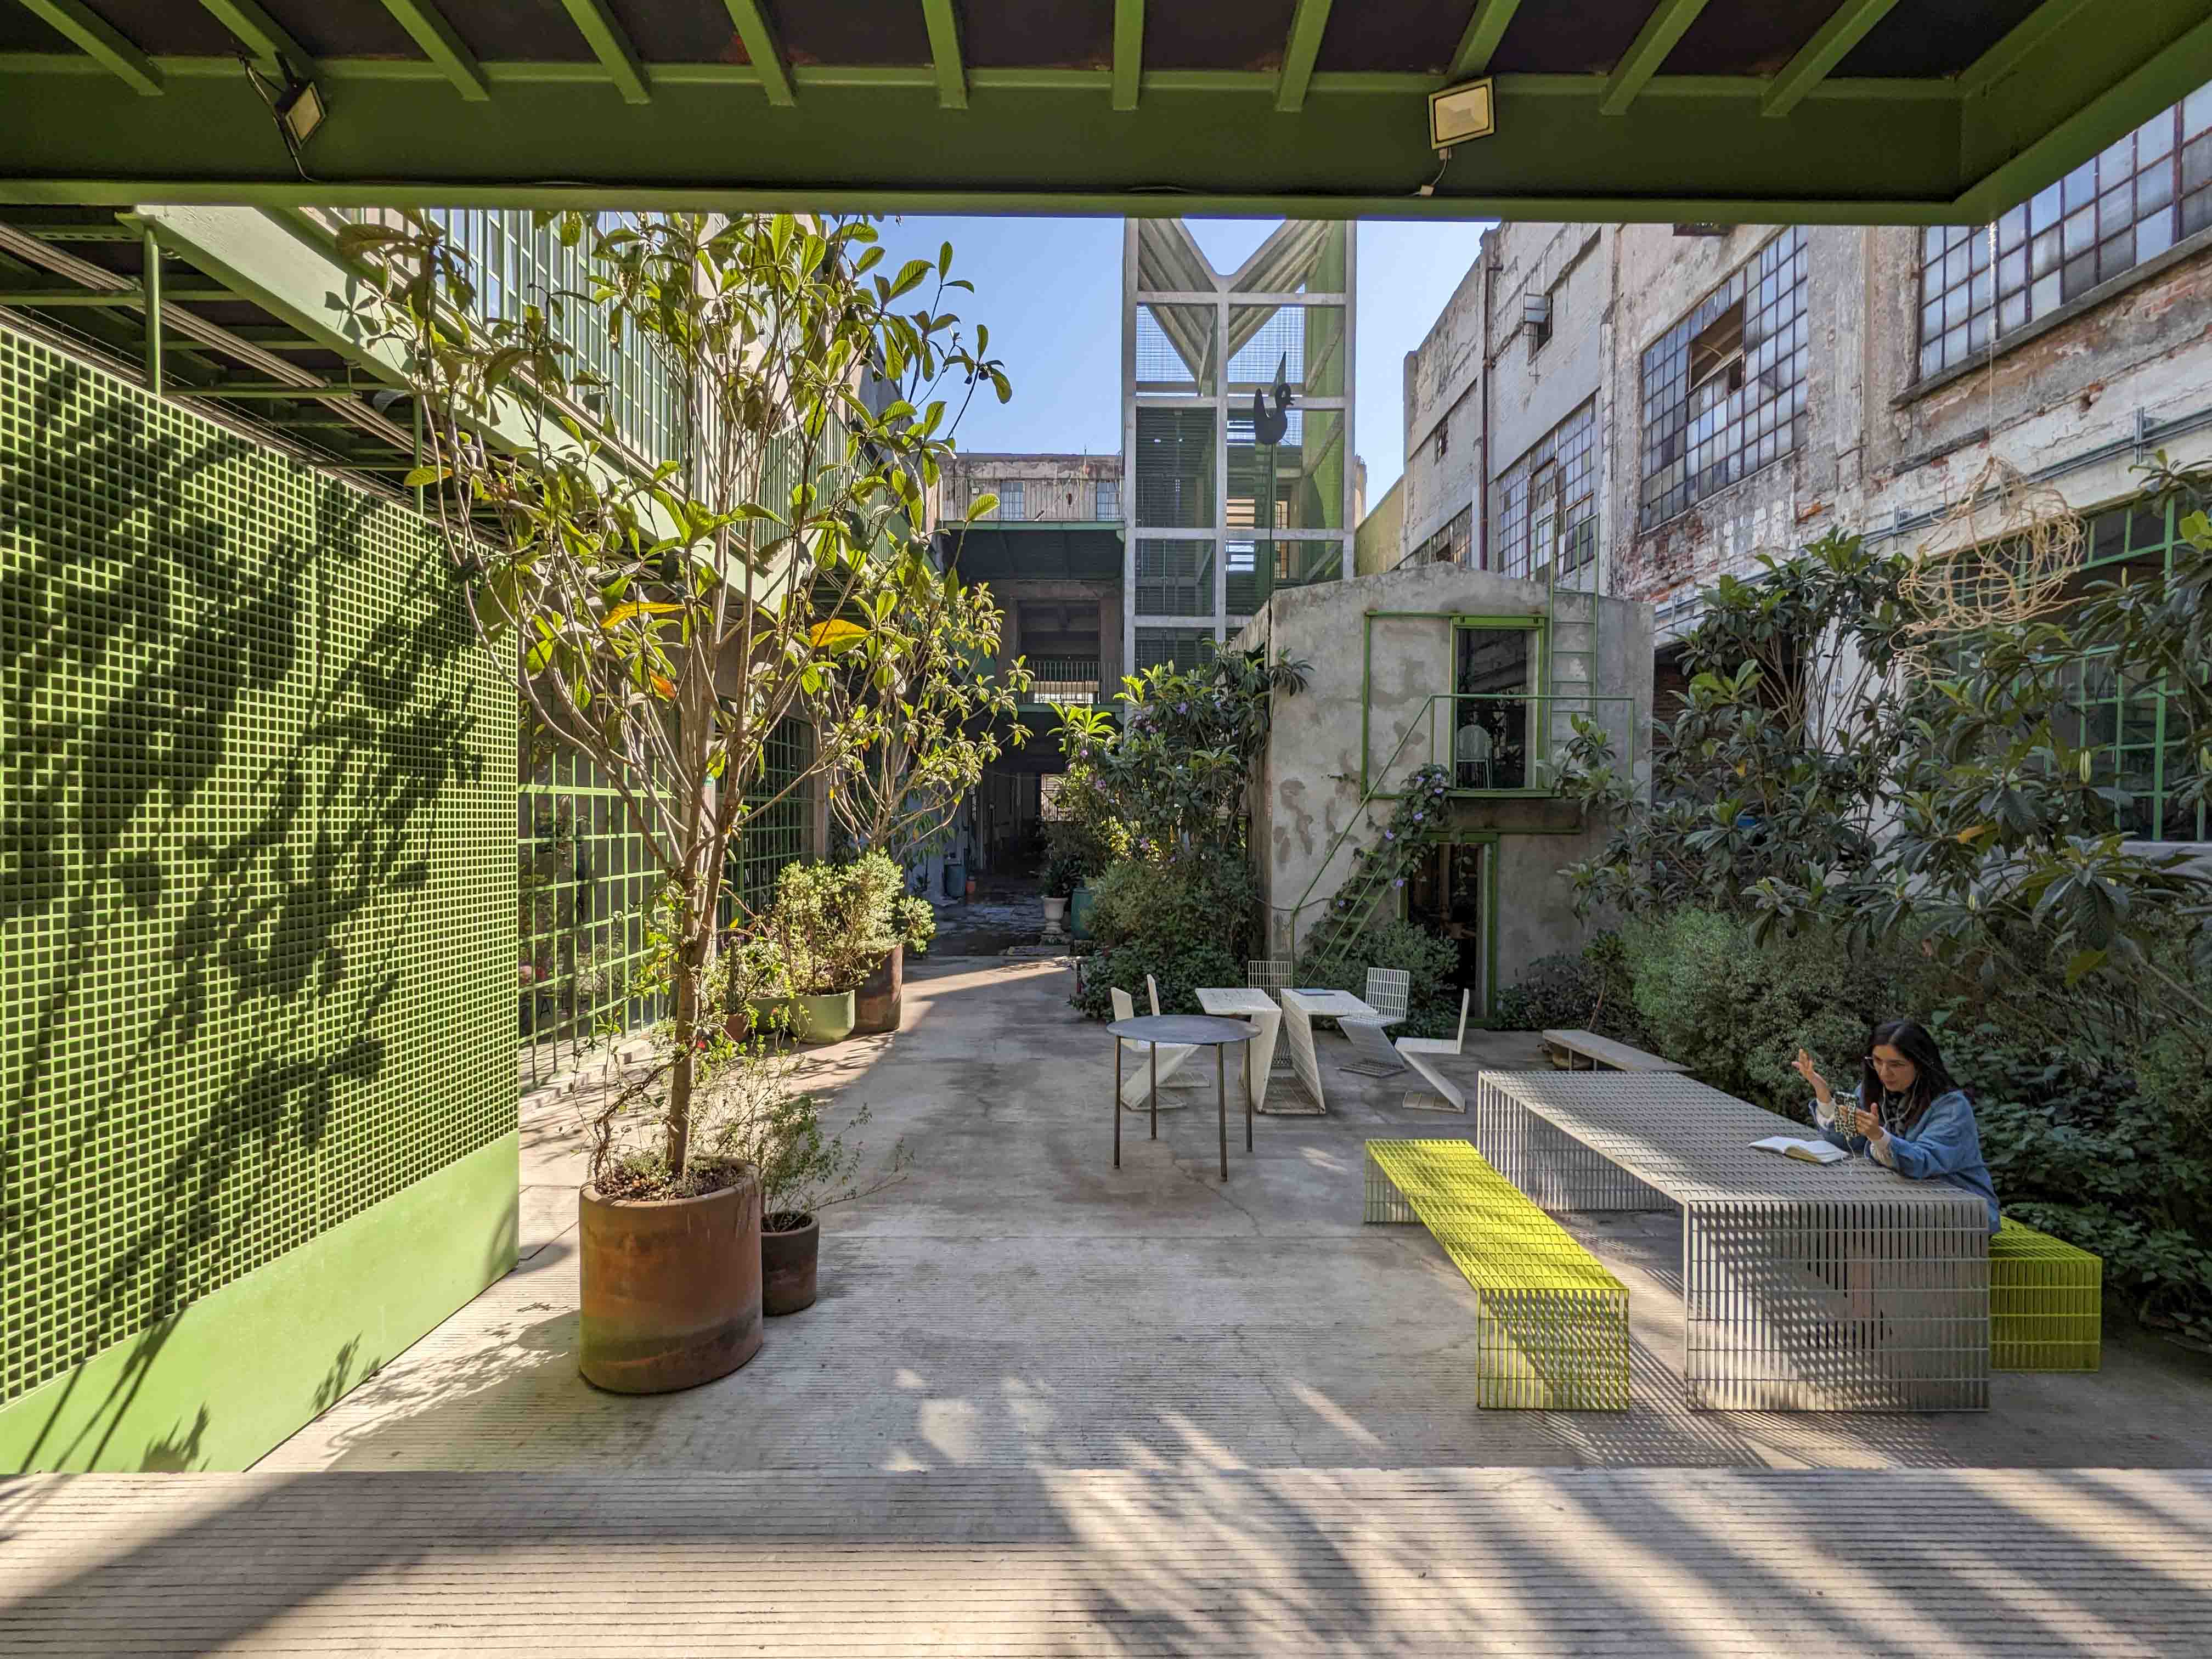 Exterior view of Laguna, an art and design collective space in Mexico City